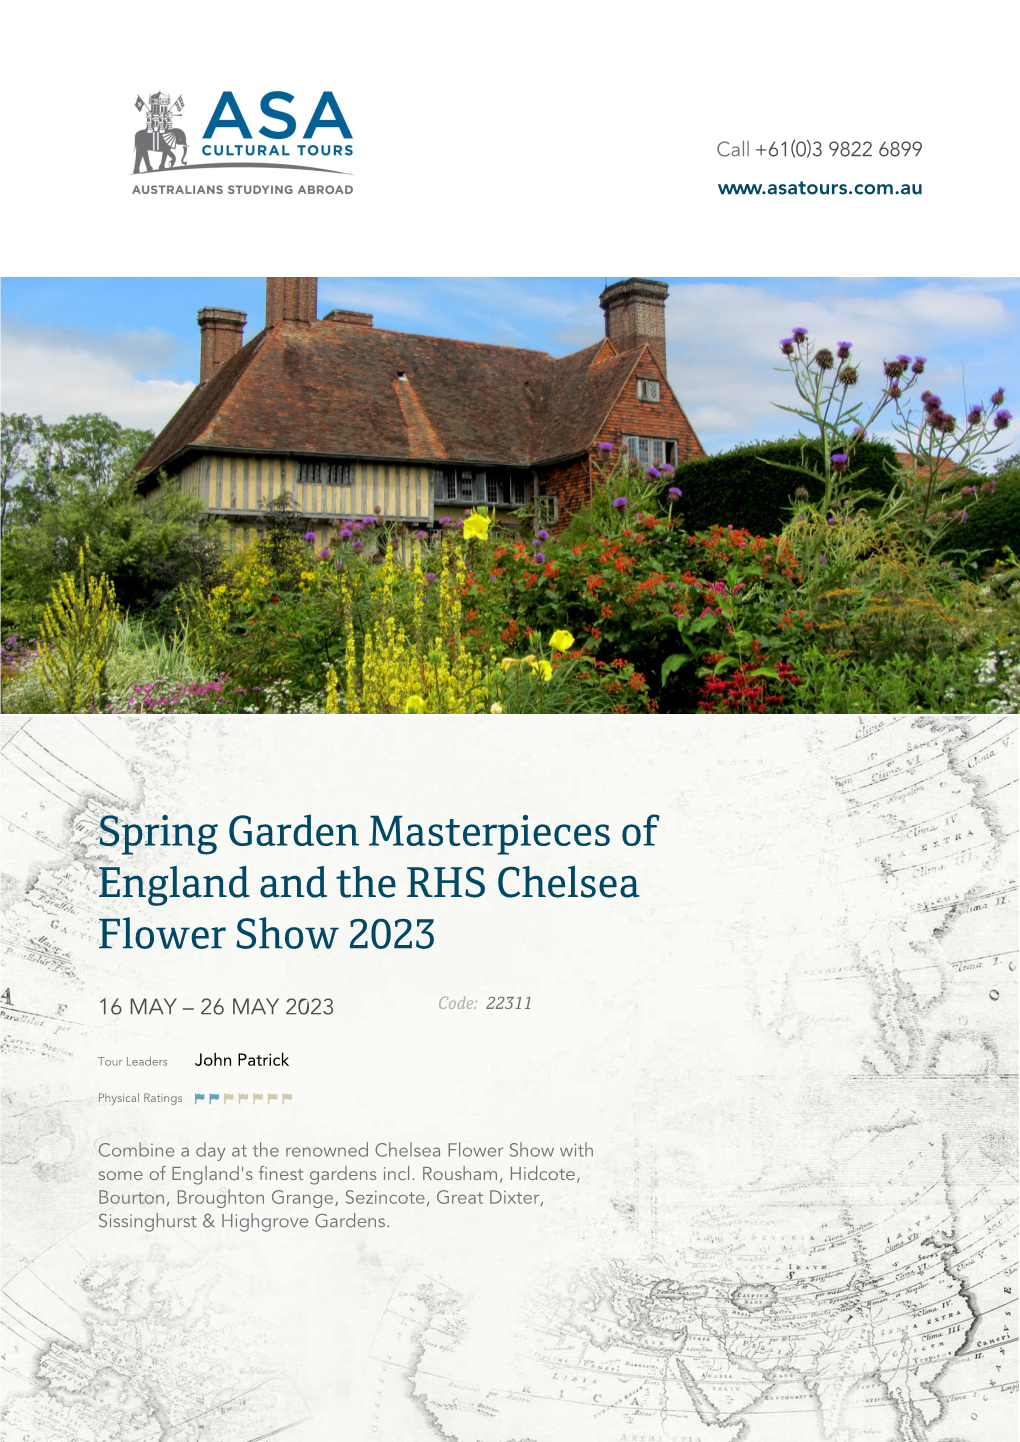 Spring Garden Masterpieces of England and the RHS Chelsea Flower Show 2023